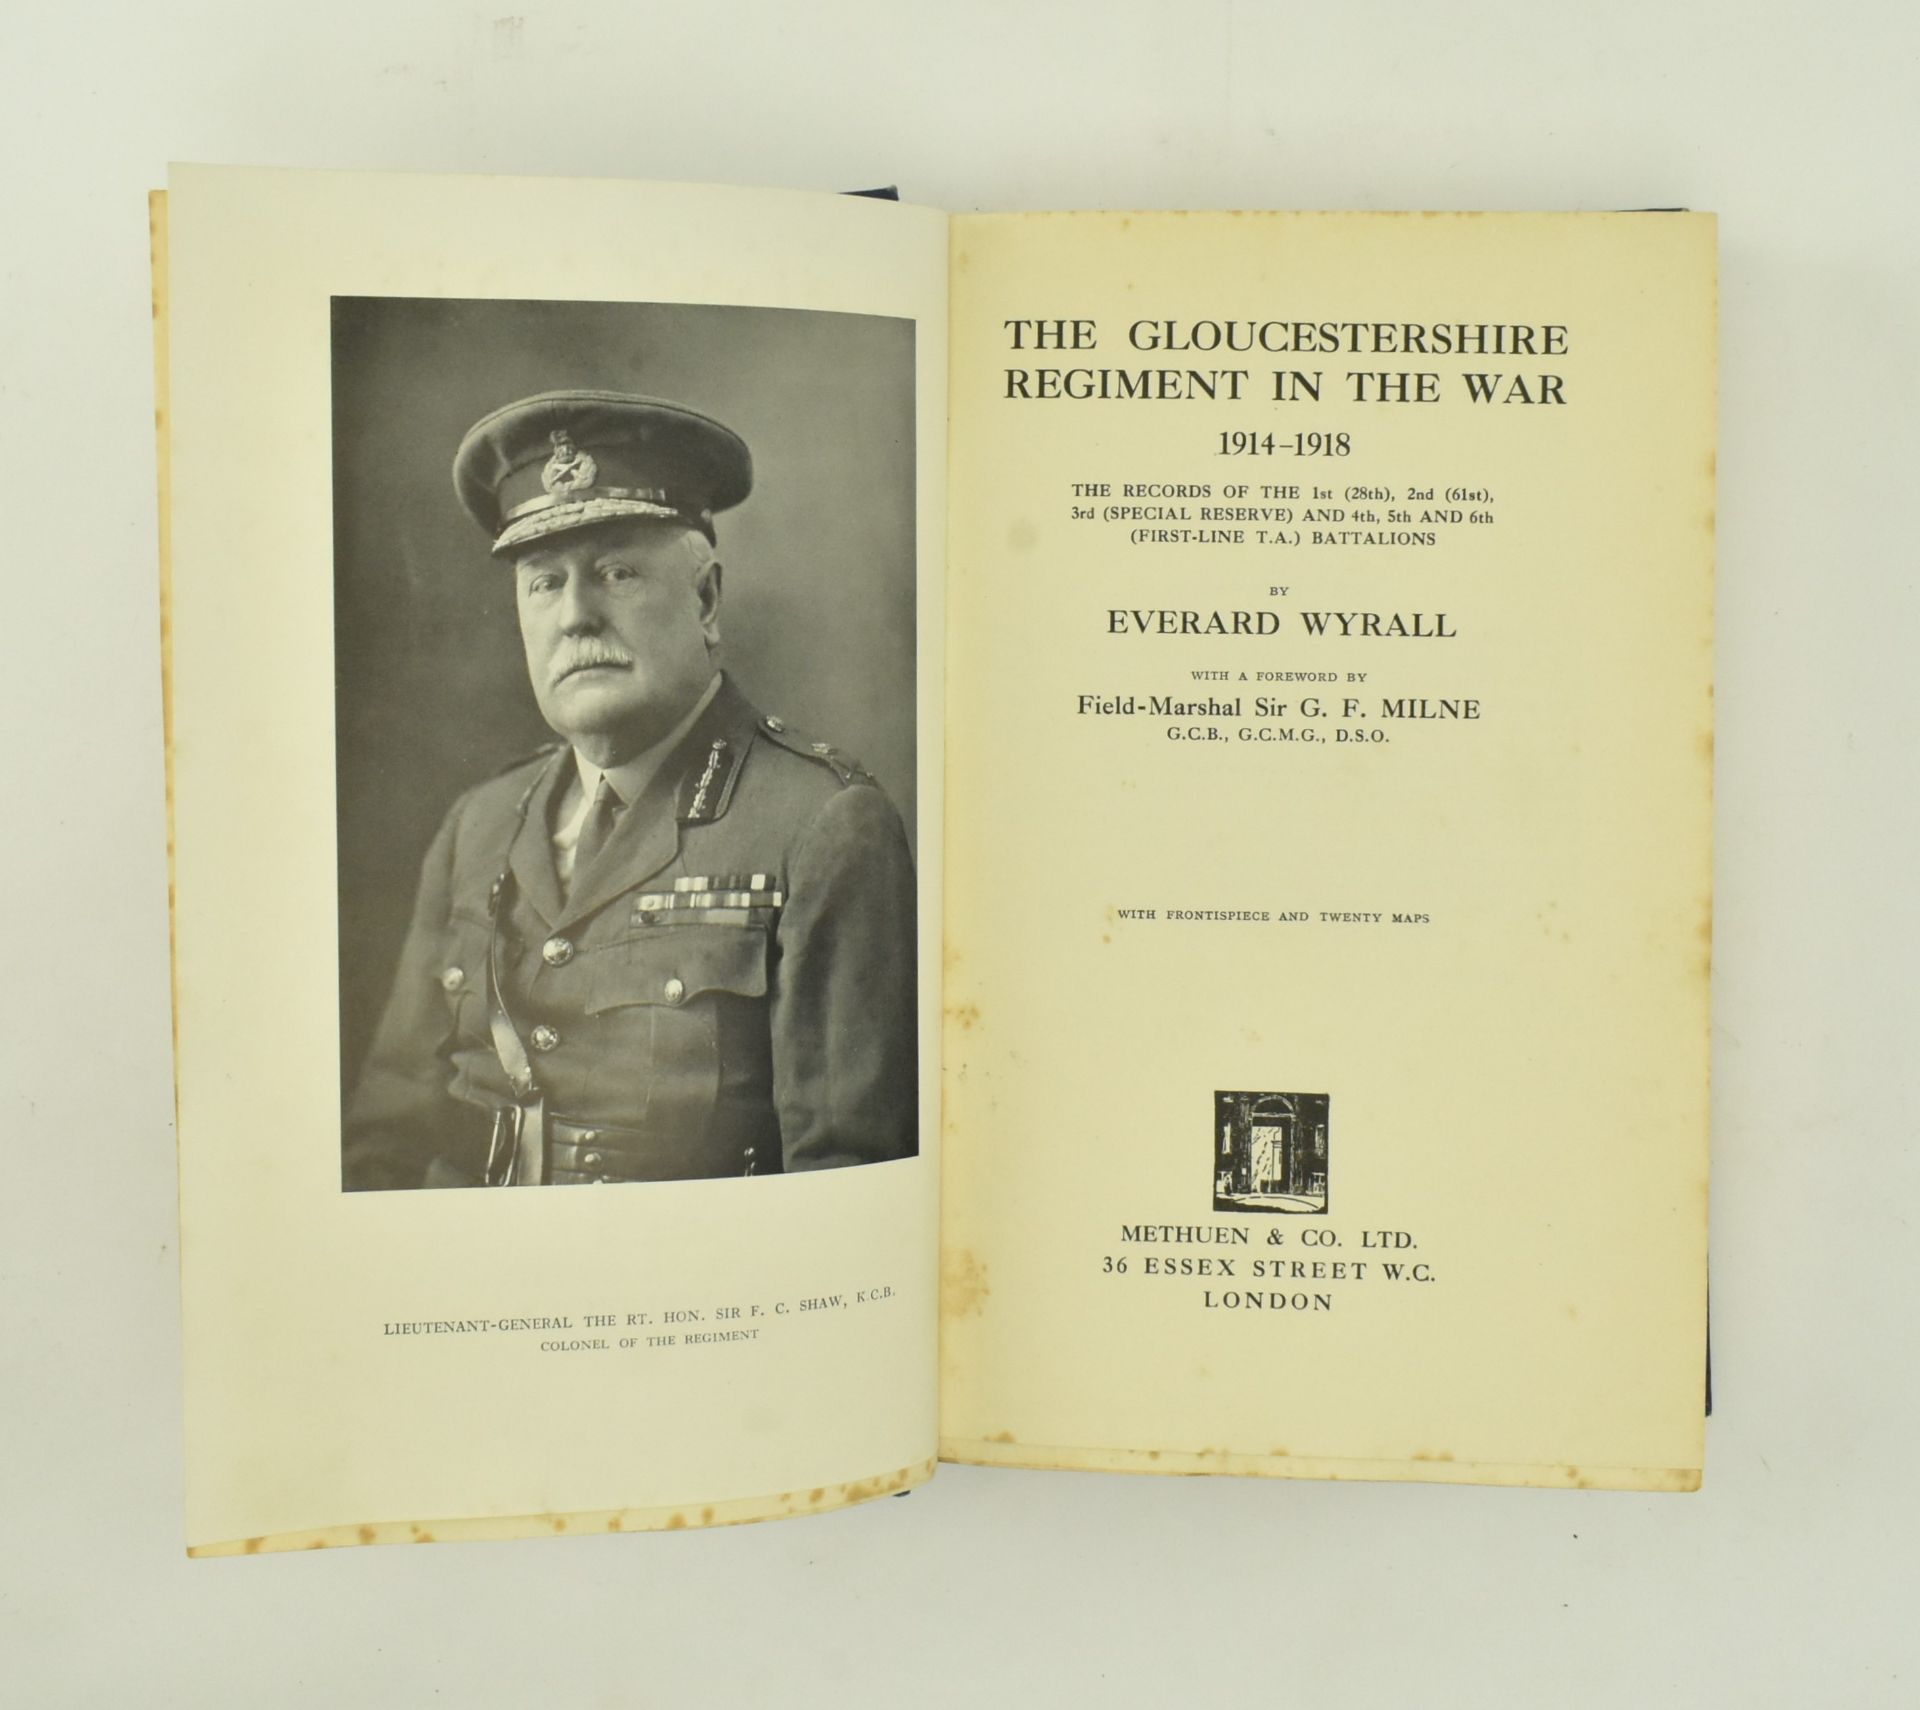 WWI INTEREST. COLLECTION OF SIX BOOKS ON THE GREAT WAR - Image 7 of 11